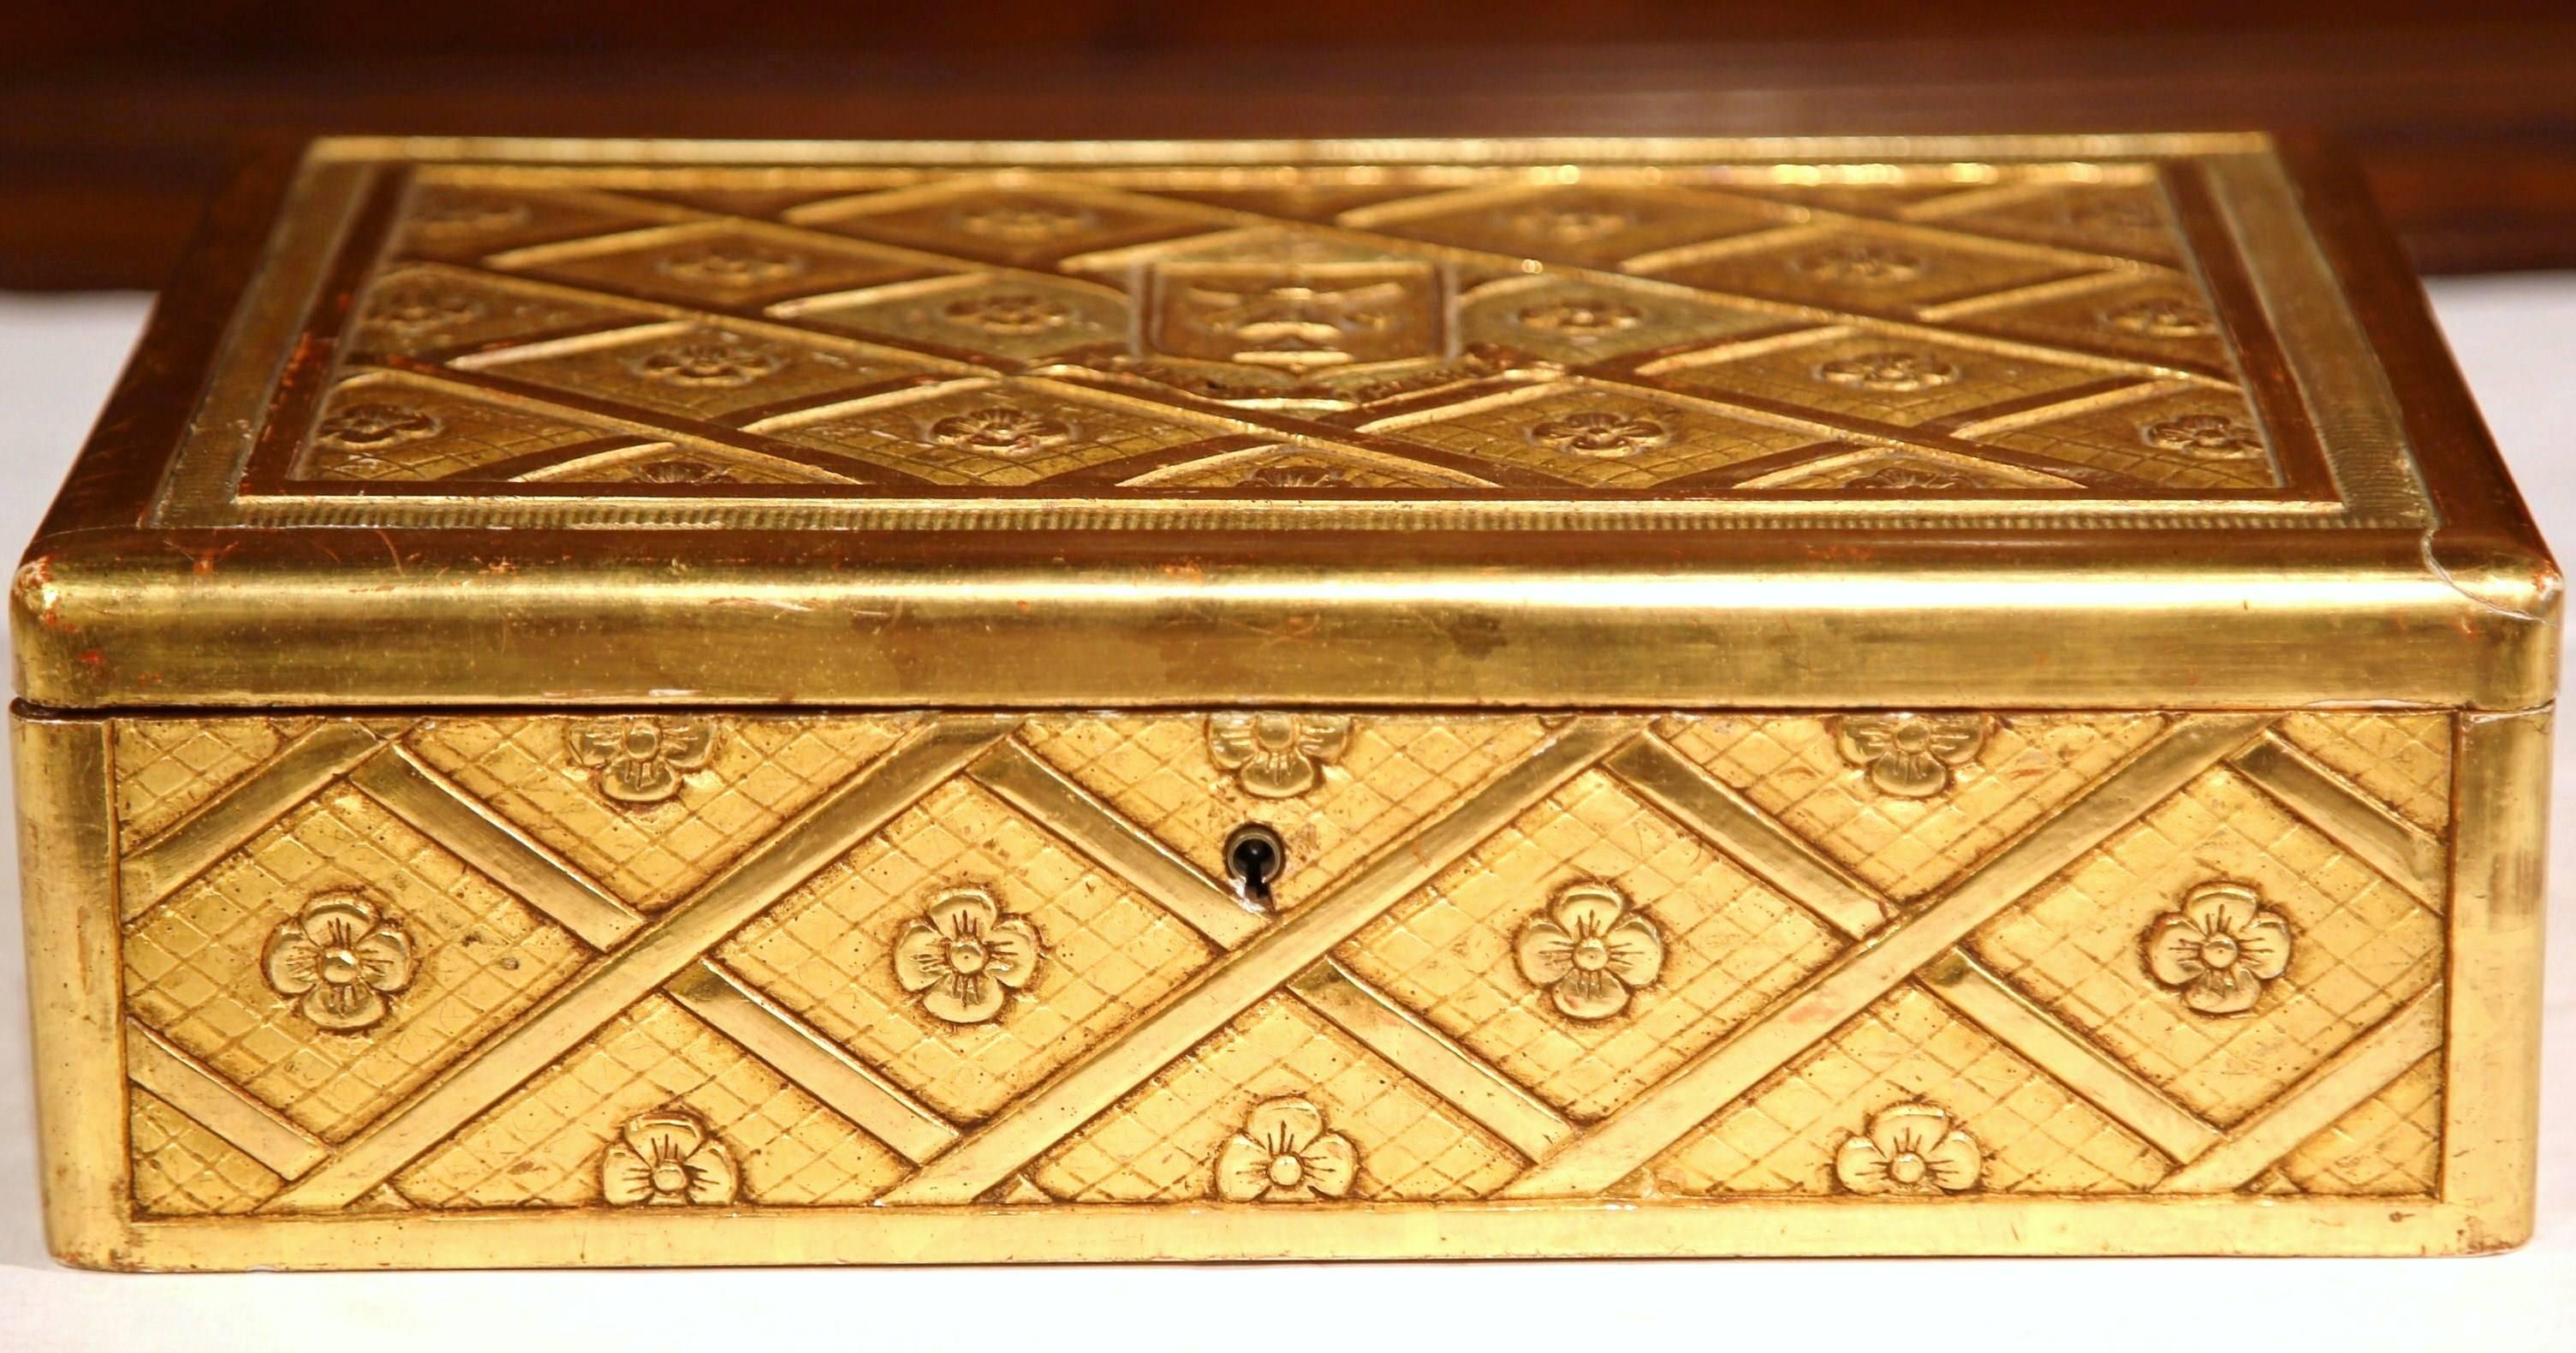 This beautiful, carved, antique box was created in Paris, France, circa 1880. The piece has a diamond, lattice shape carving treatment throughout, and front has a crest with the following motto underneath: "tout est change" (everything has